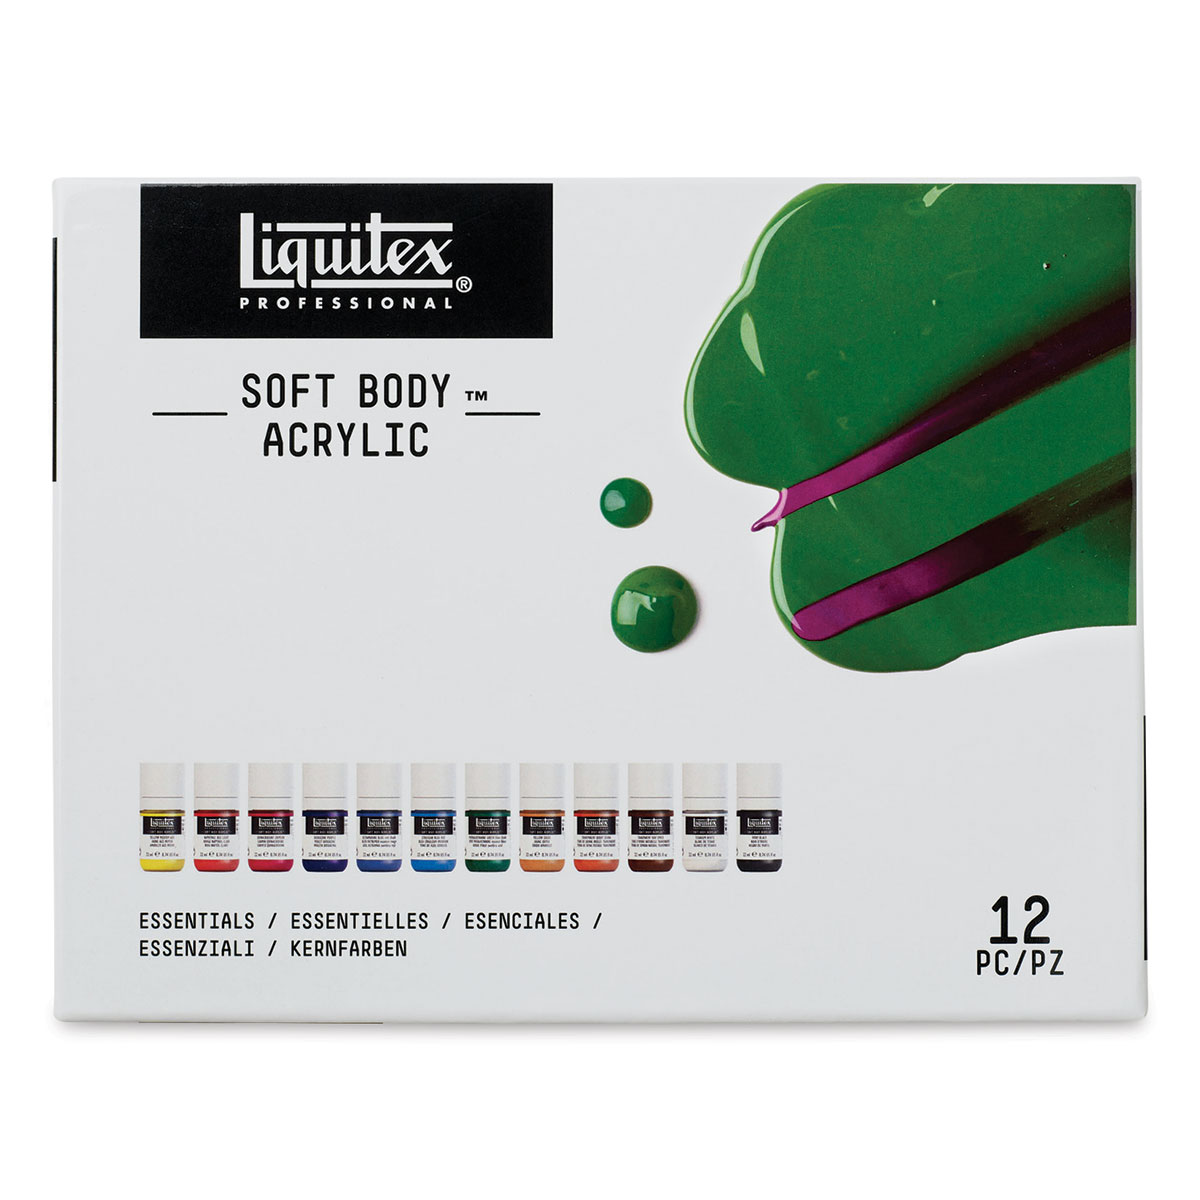 Liquitex Soft Body Acrylic Paint 59ml: Iridescent Rich Gold S2 - The  Drawing Room